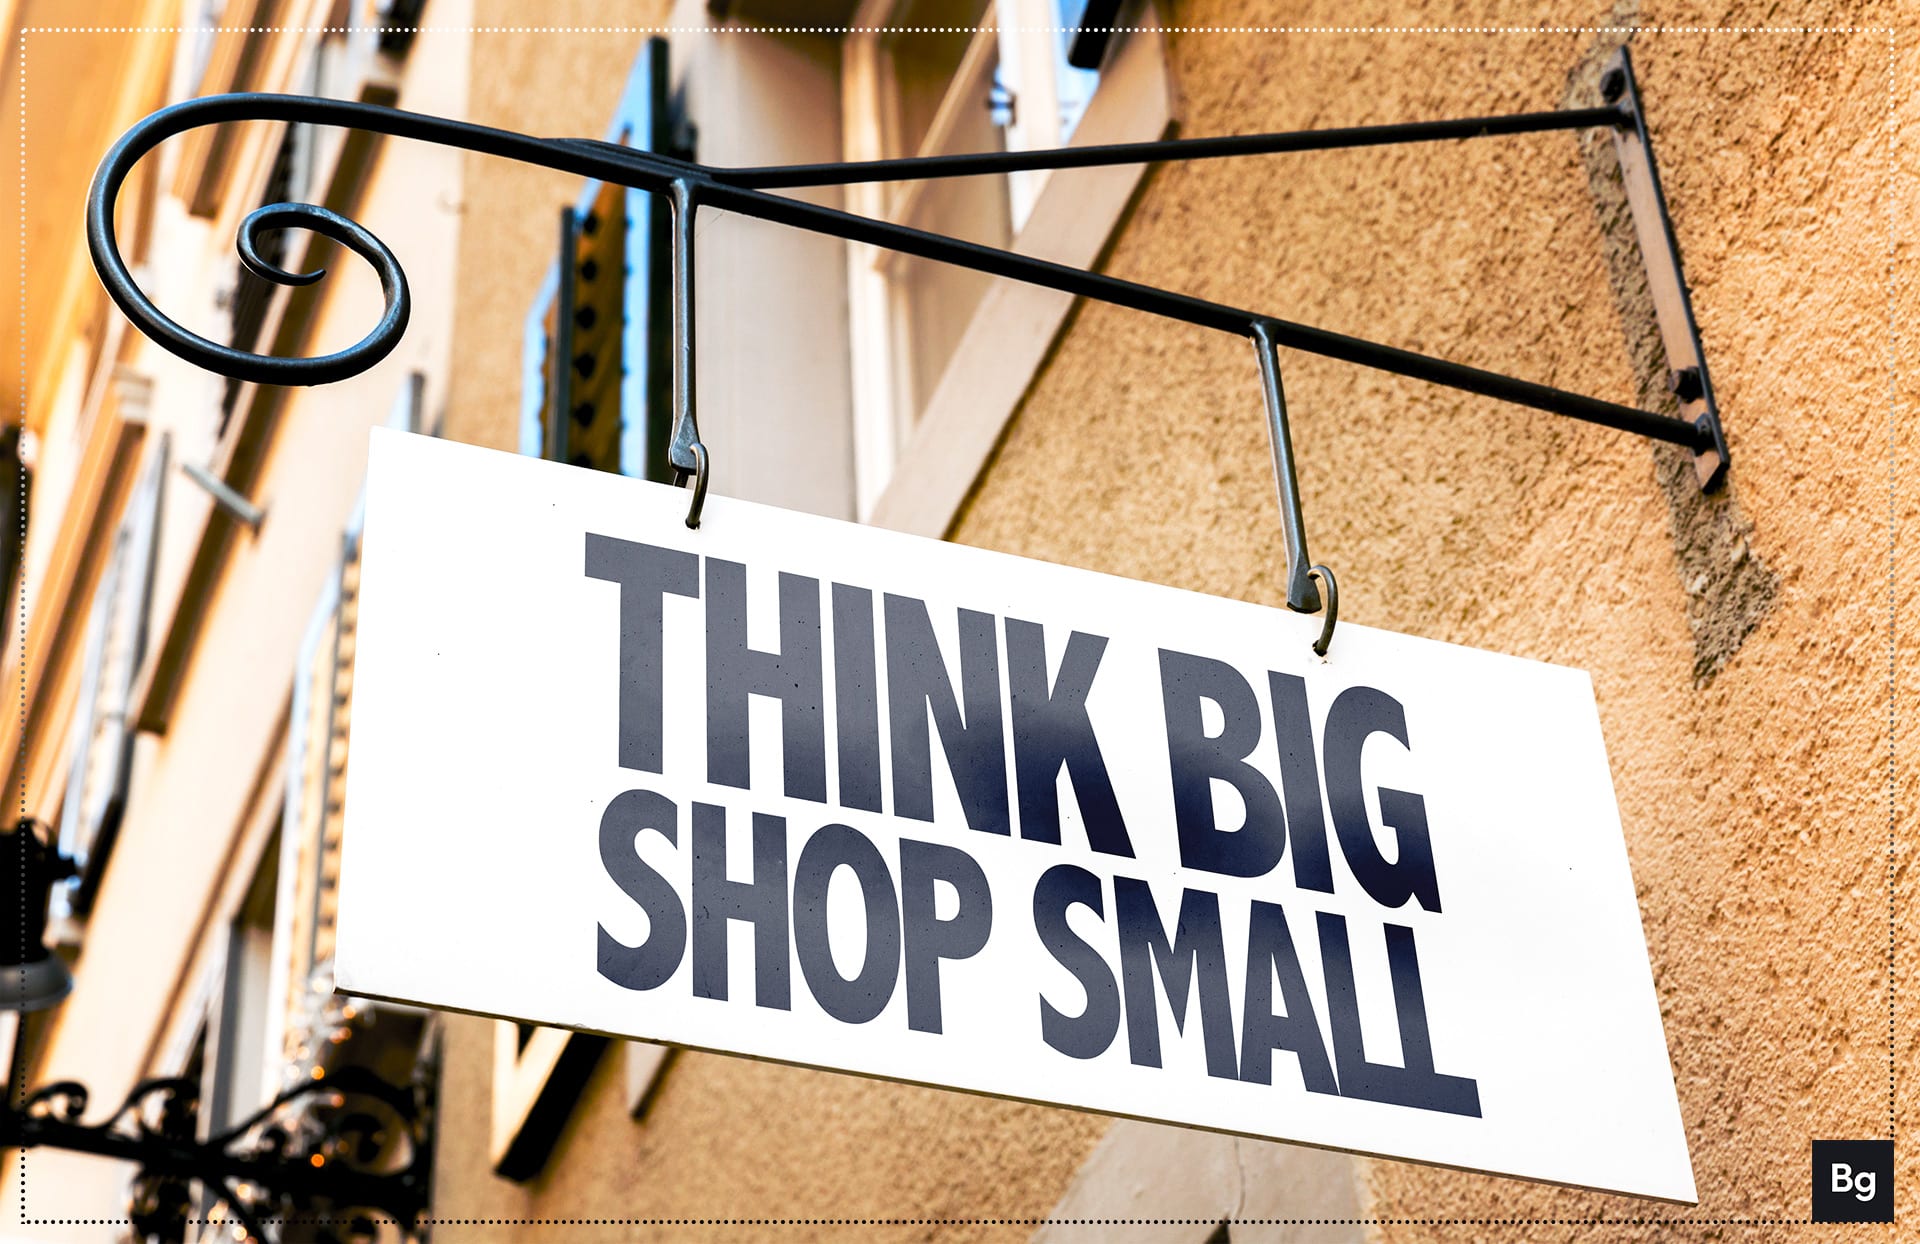 Think Big Shop Small. Incentive for local SEO